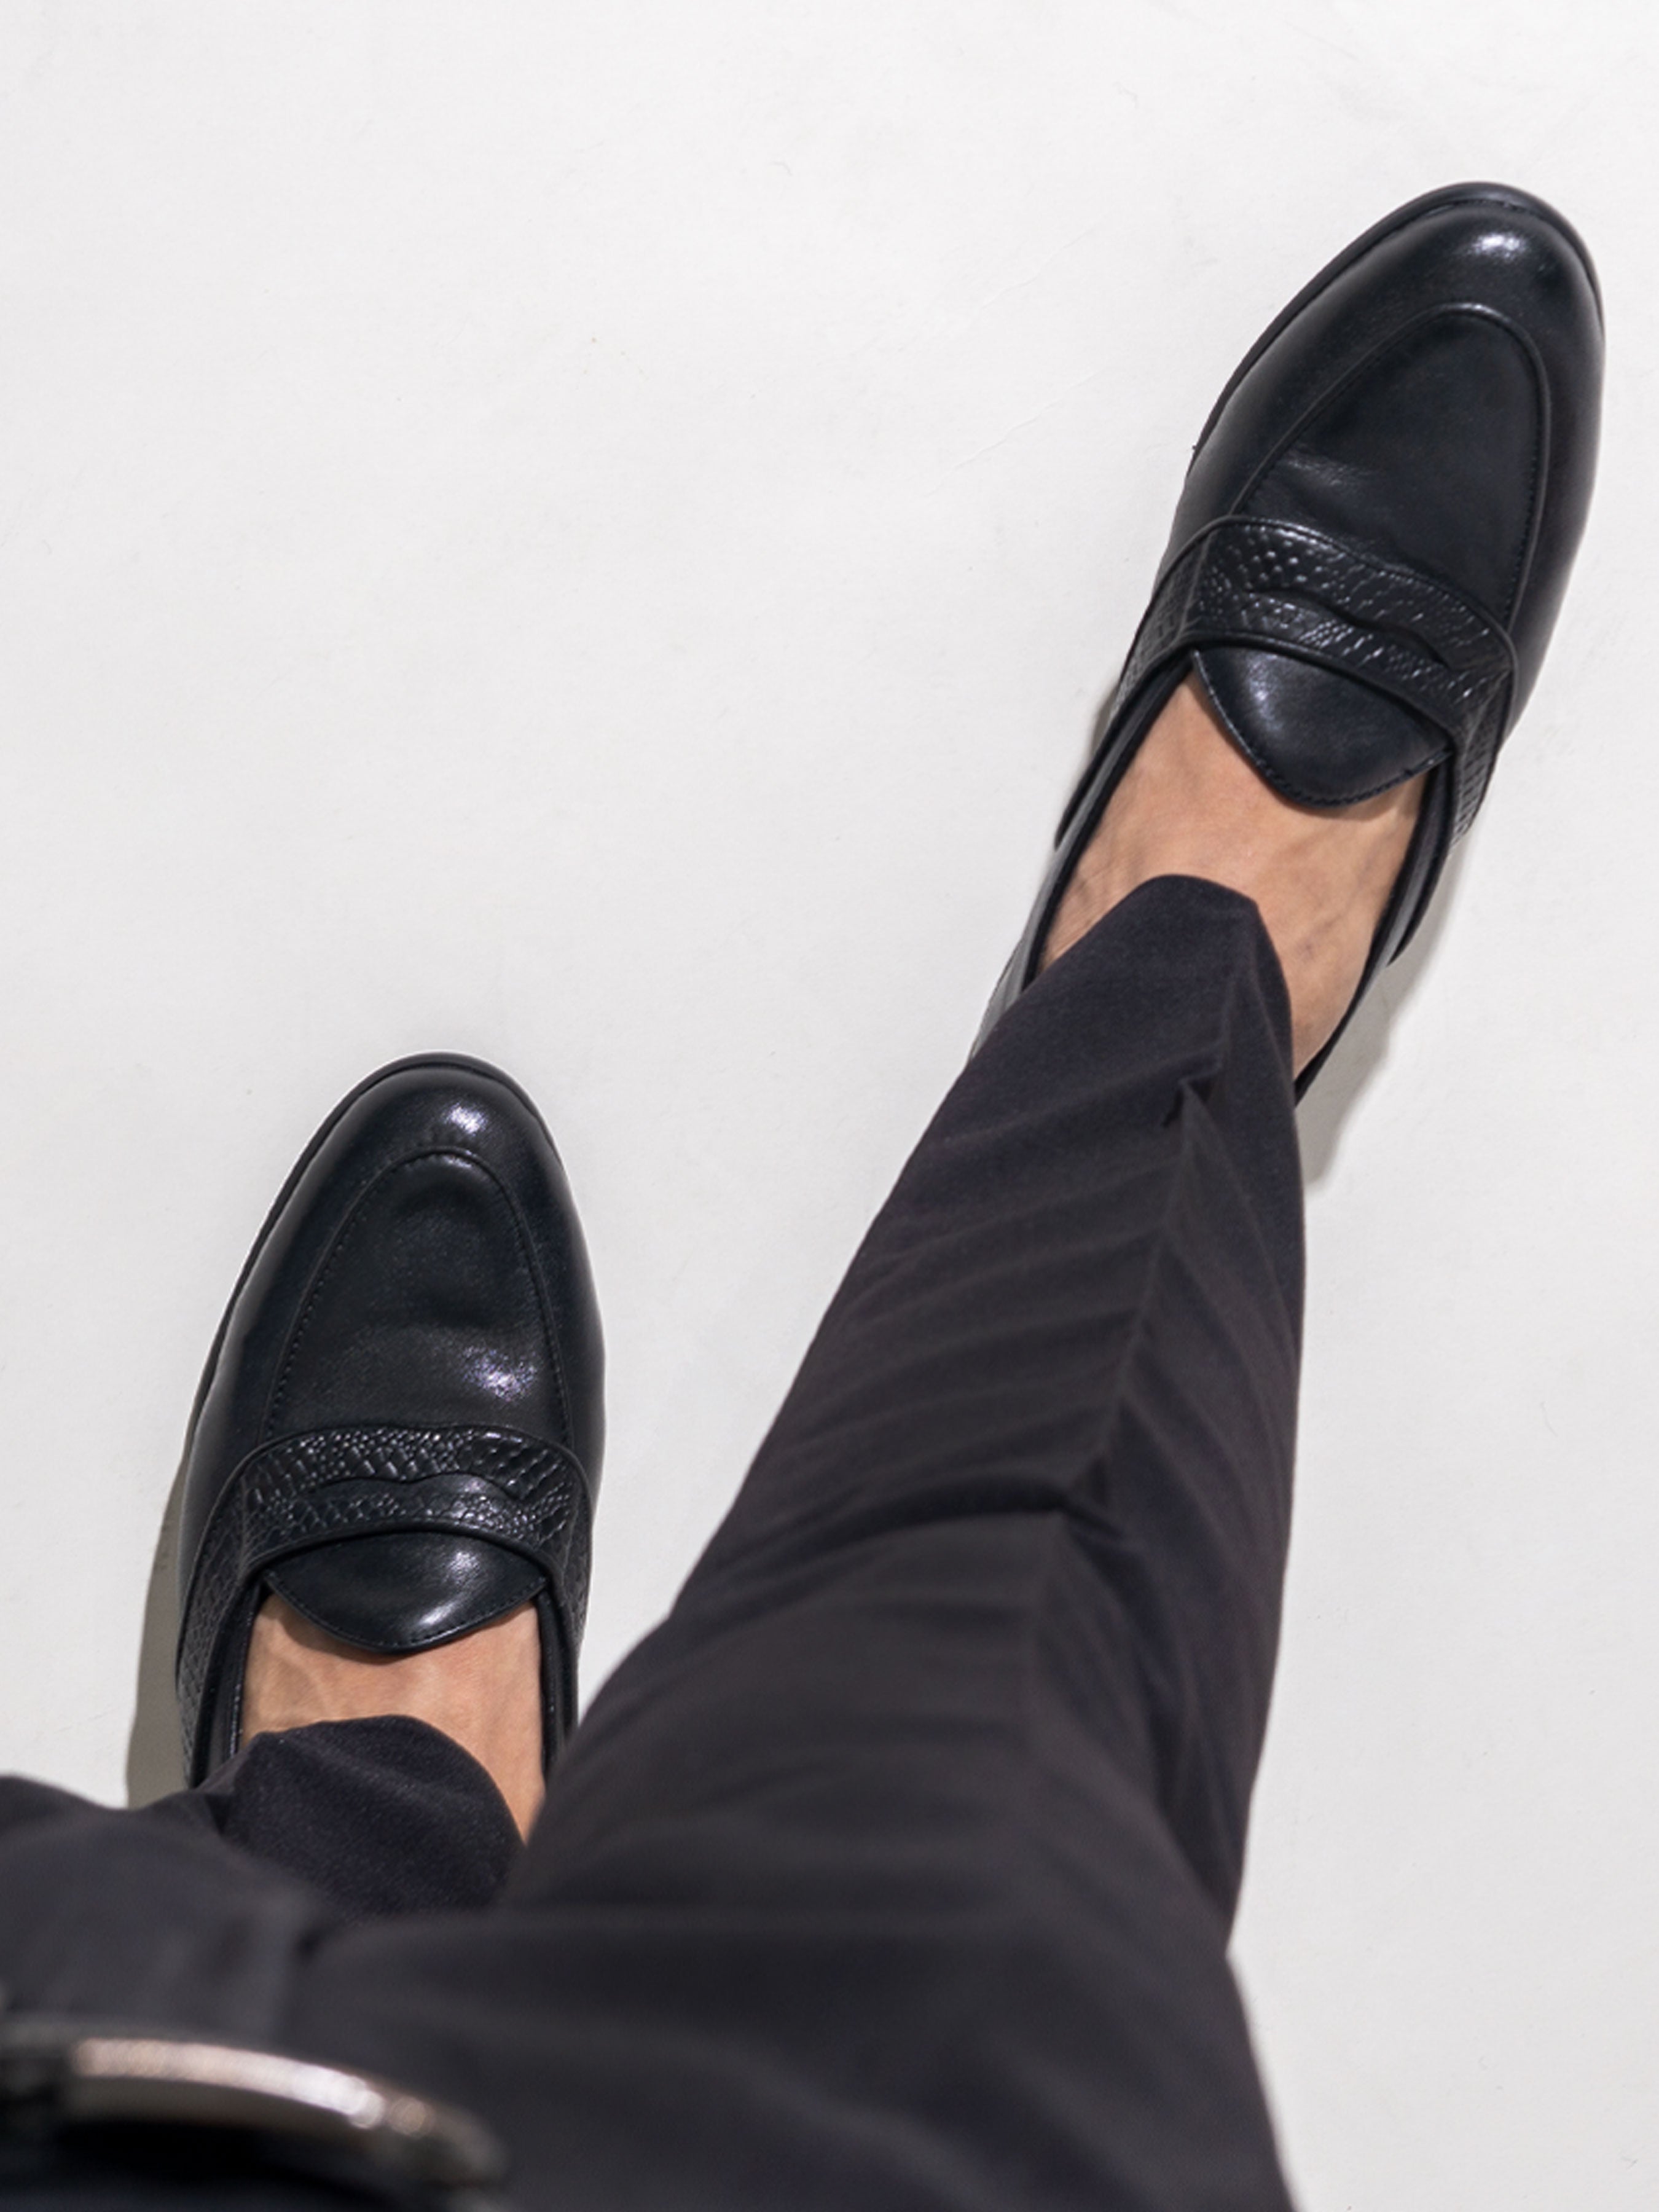 Belgian Loafer with Penny - Black Pebble Grain Leather (Phyton Embossed Strap) - Zeve Shoes